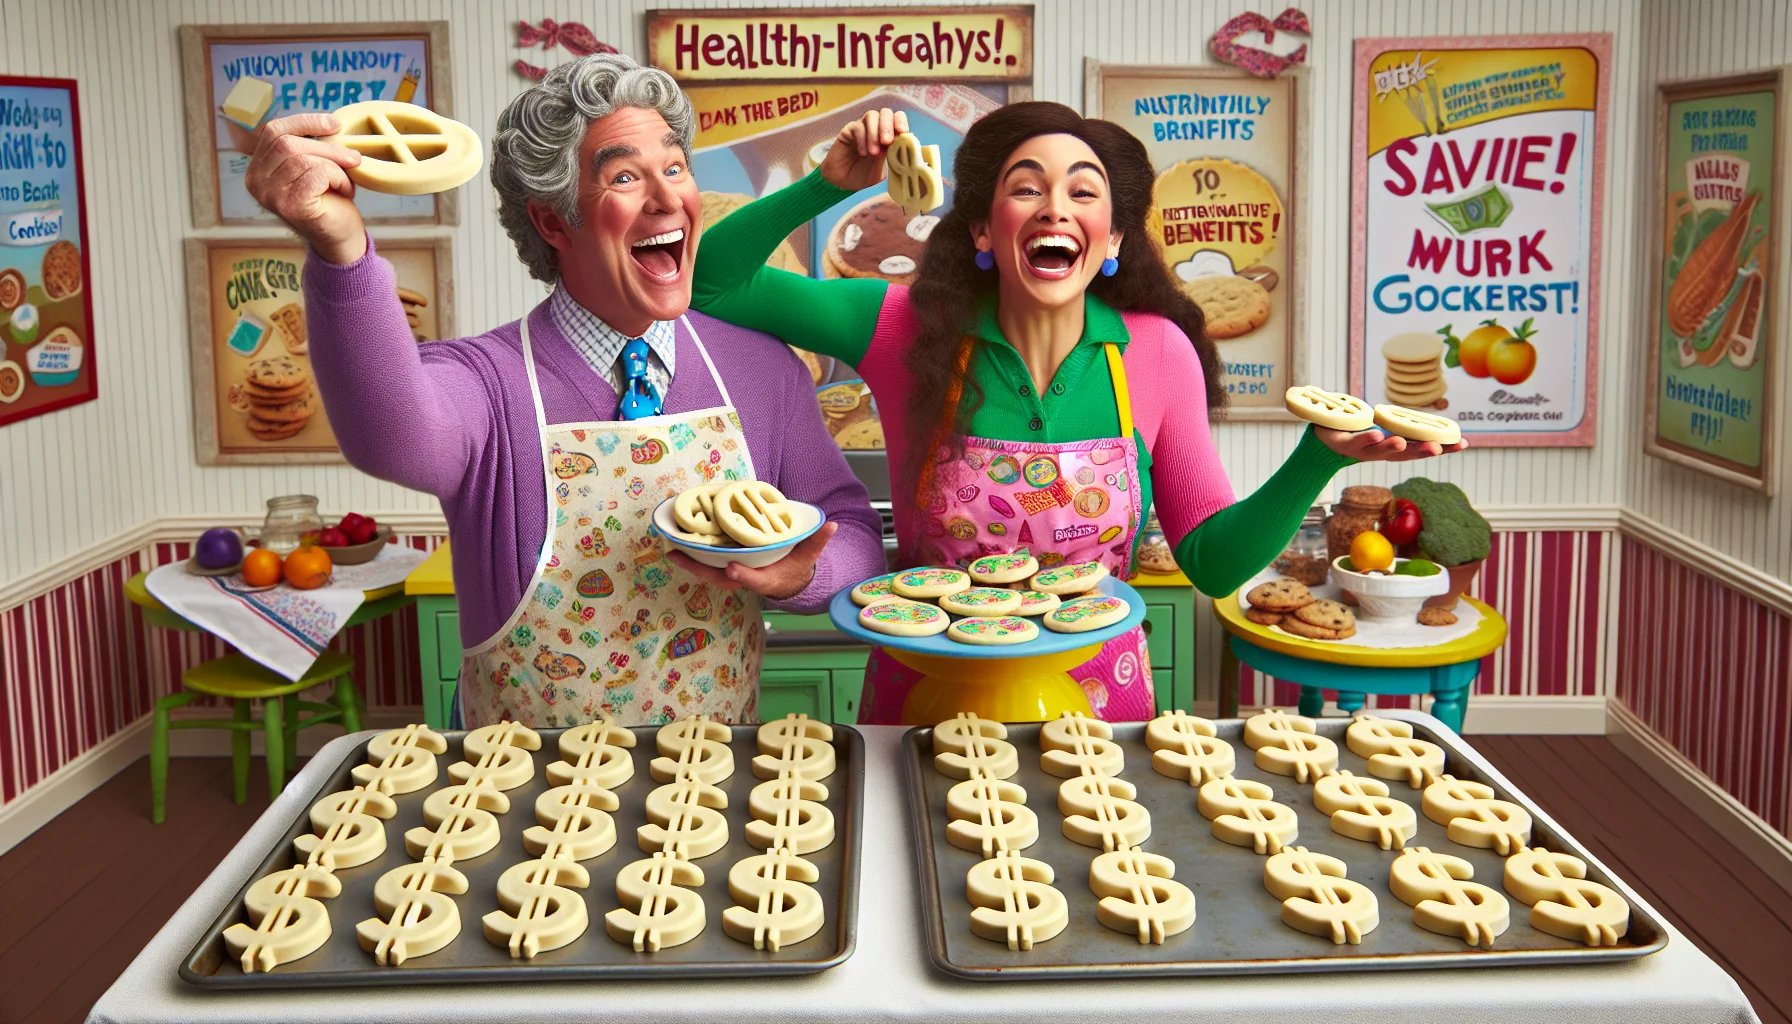 A humorous kitchen scene where a middle-aged Caucasian male and a young Hispanic female are joyfully baking cookies without using butter or eggs. The cookies are uniquely shaped like dollar signs, emphasizing the savings of using less expensive ingredients. They both wear vibrant aprons and hold health-infographic platters displaying nutritional benefits of their cookies. The room is filled with decorative posters promoting healthy eating and frugality. The display should be full of colors and laughter to attract people towards a healthier and more cost-effective lifestyle.